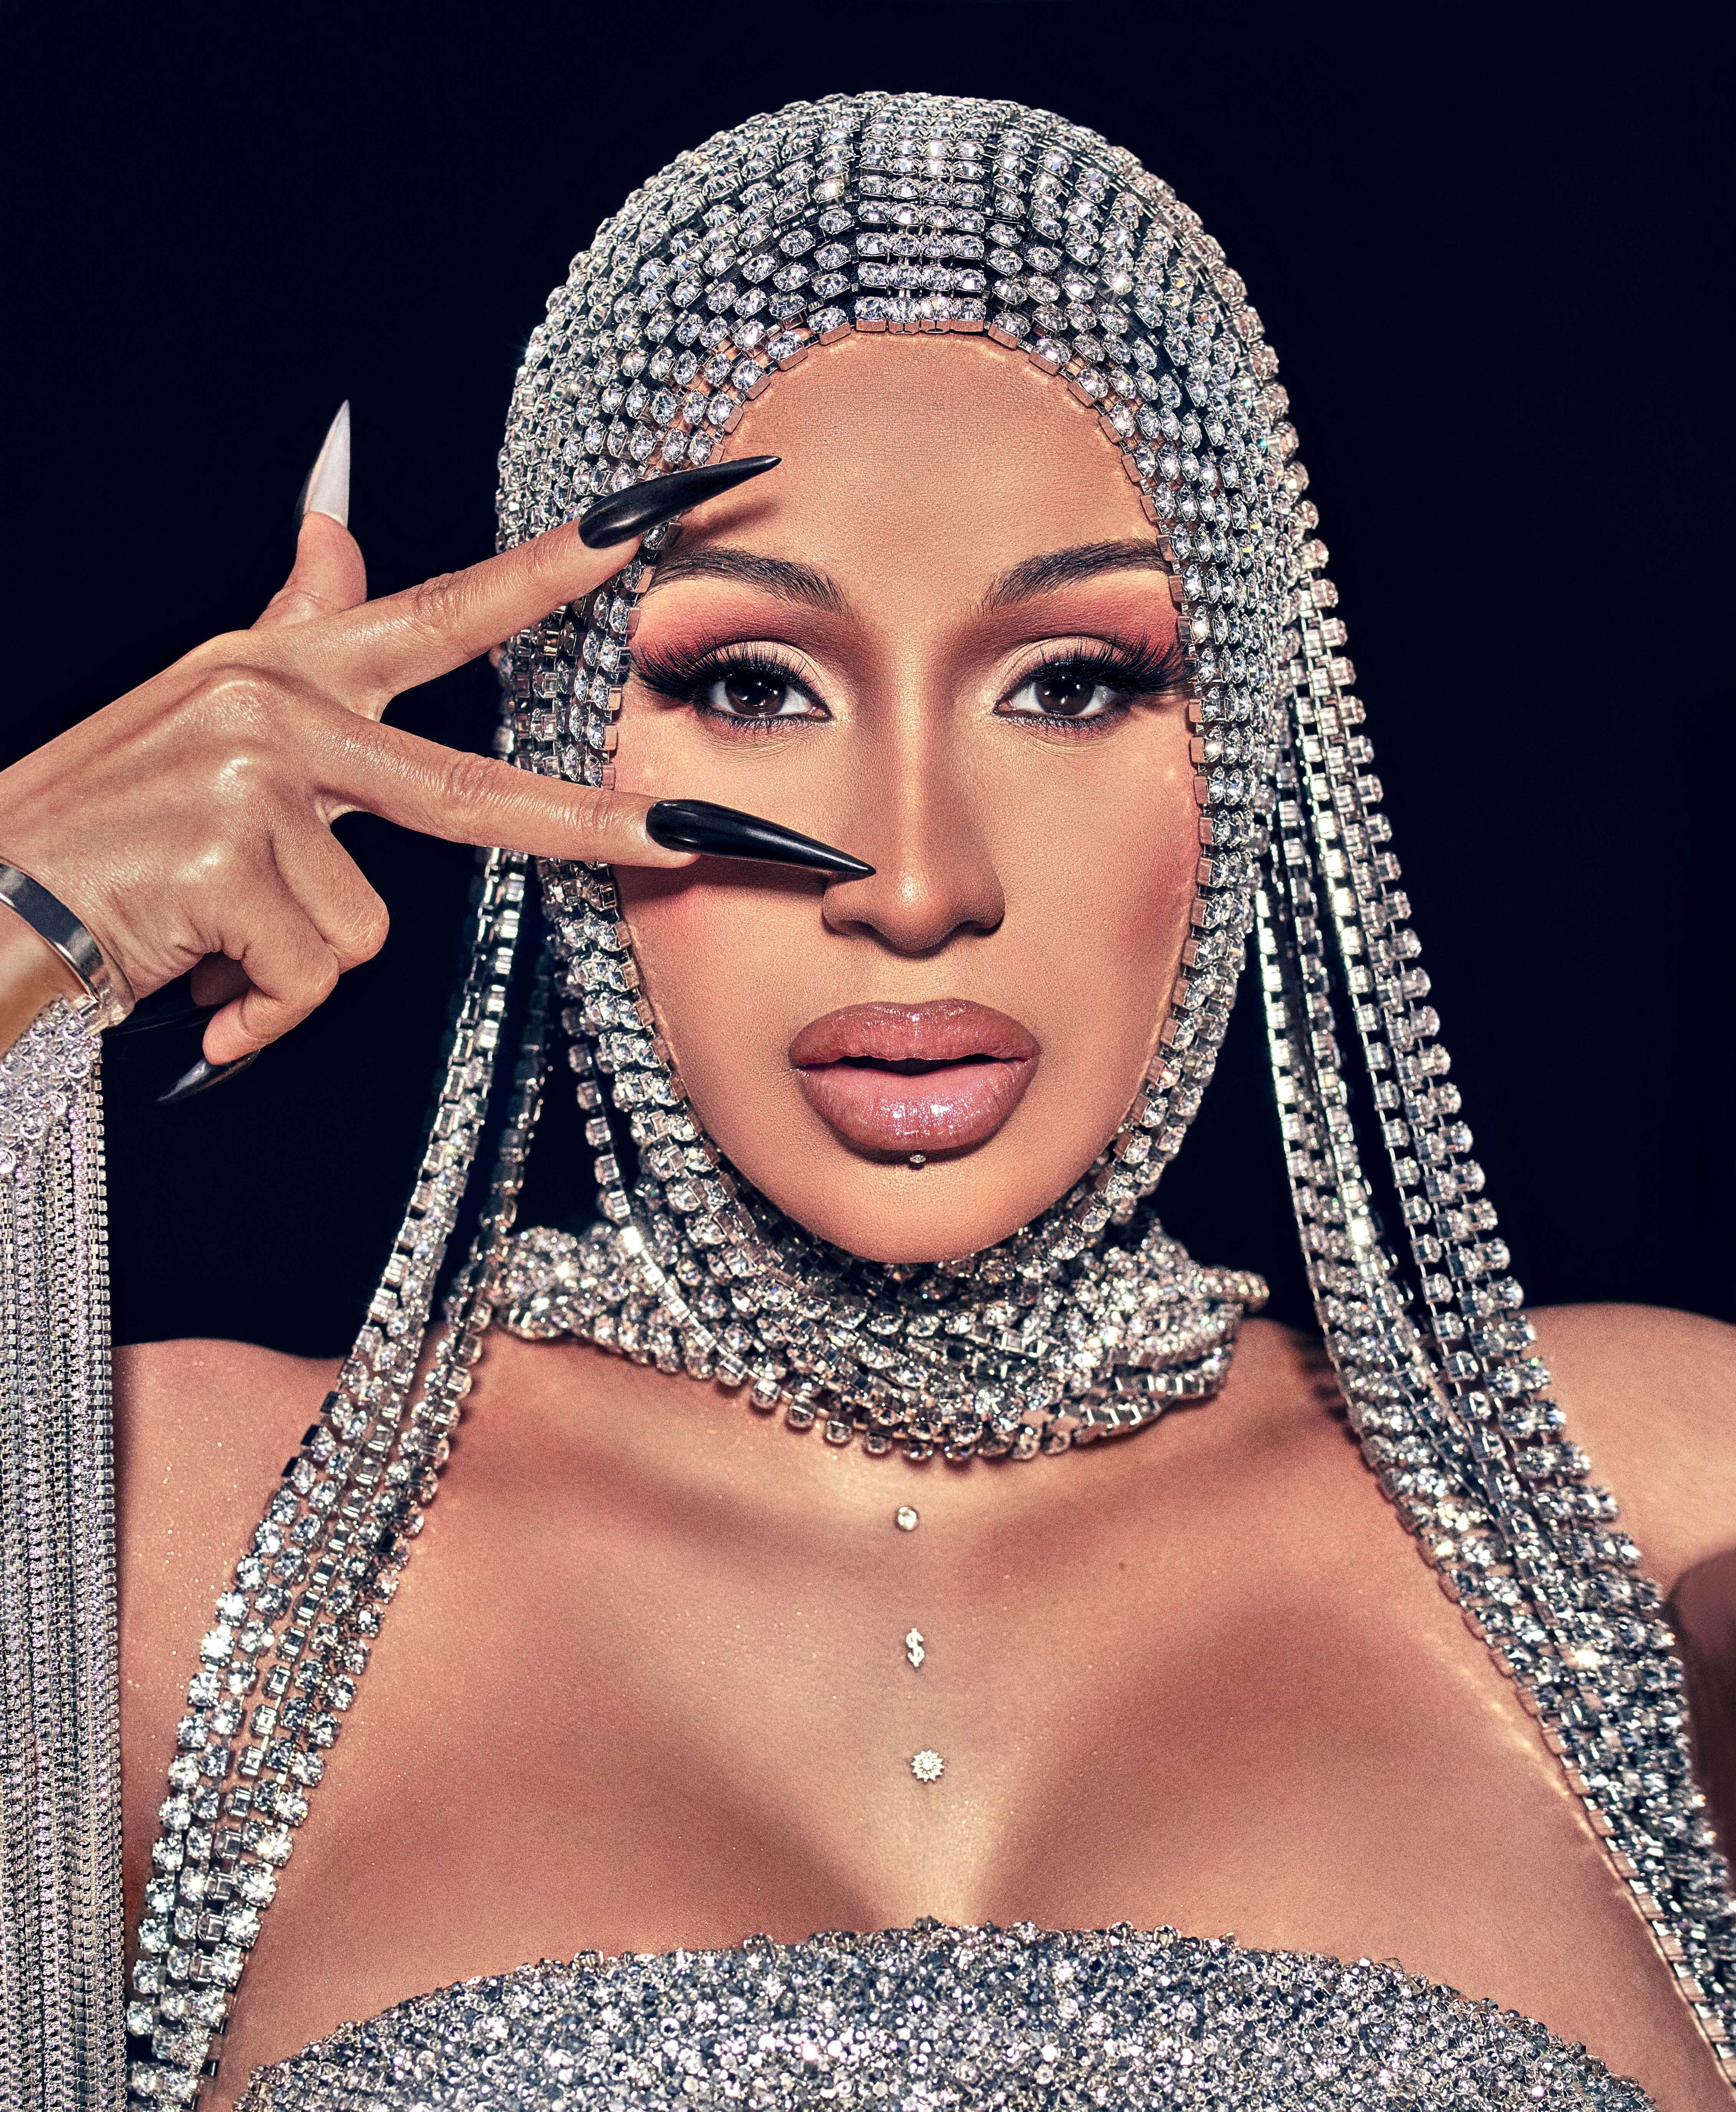 Cardi B on Her New Music, Marriage to Offset, and Fighting for Breonna Taylor pic